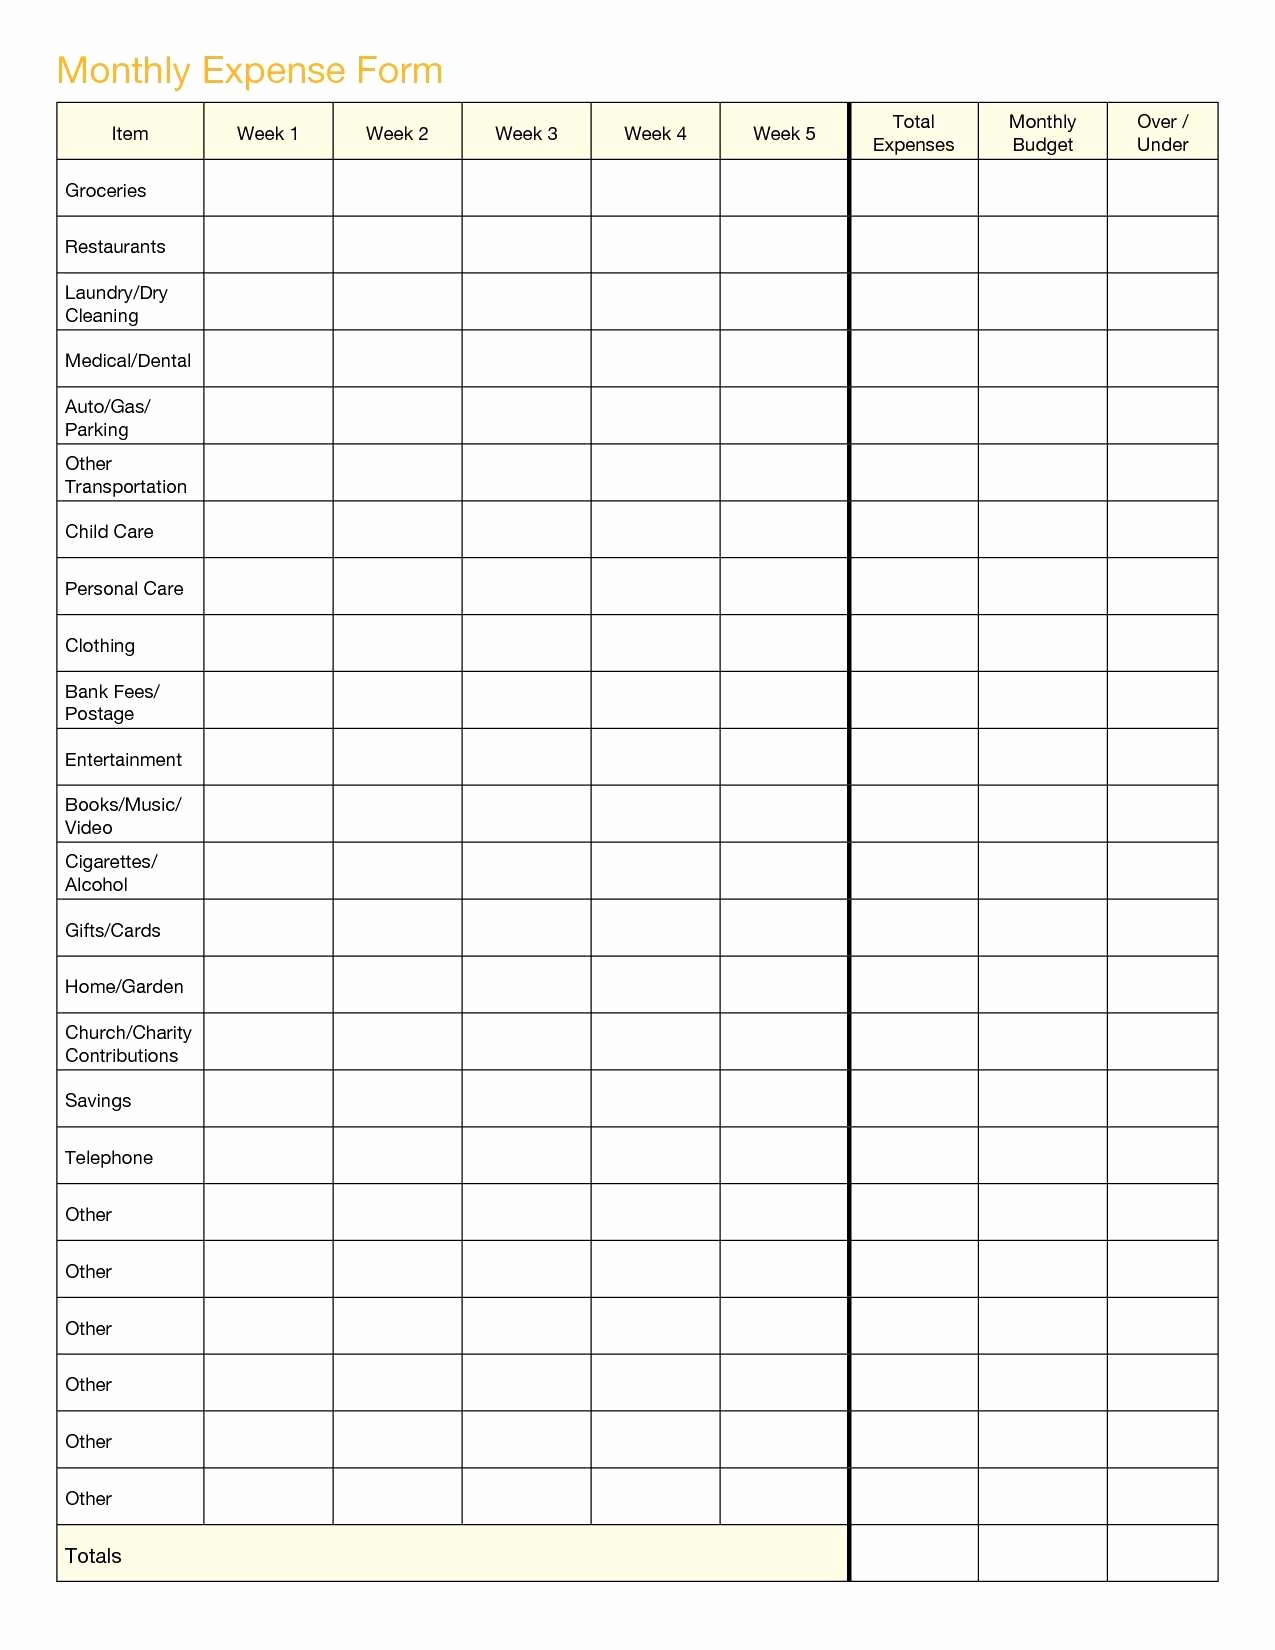 Inventory Sheets For Small Business New Inventory Sheets For Small with Spreadsheets For Small Business